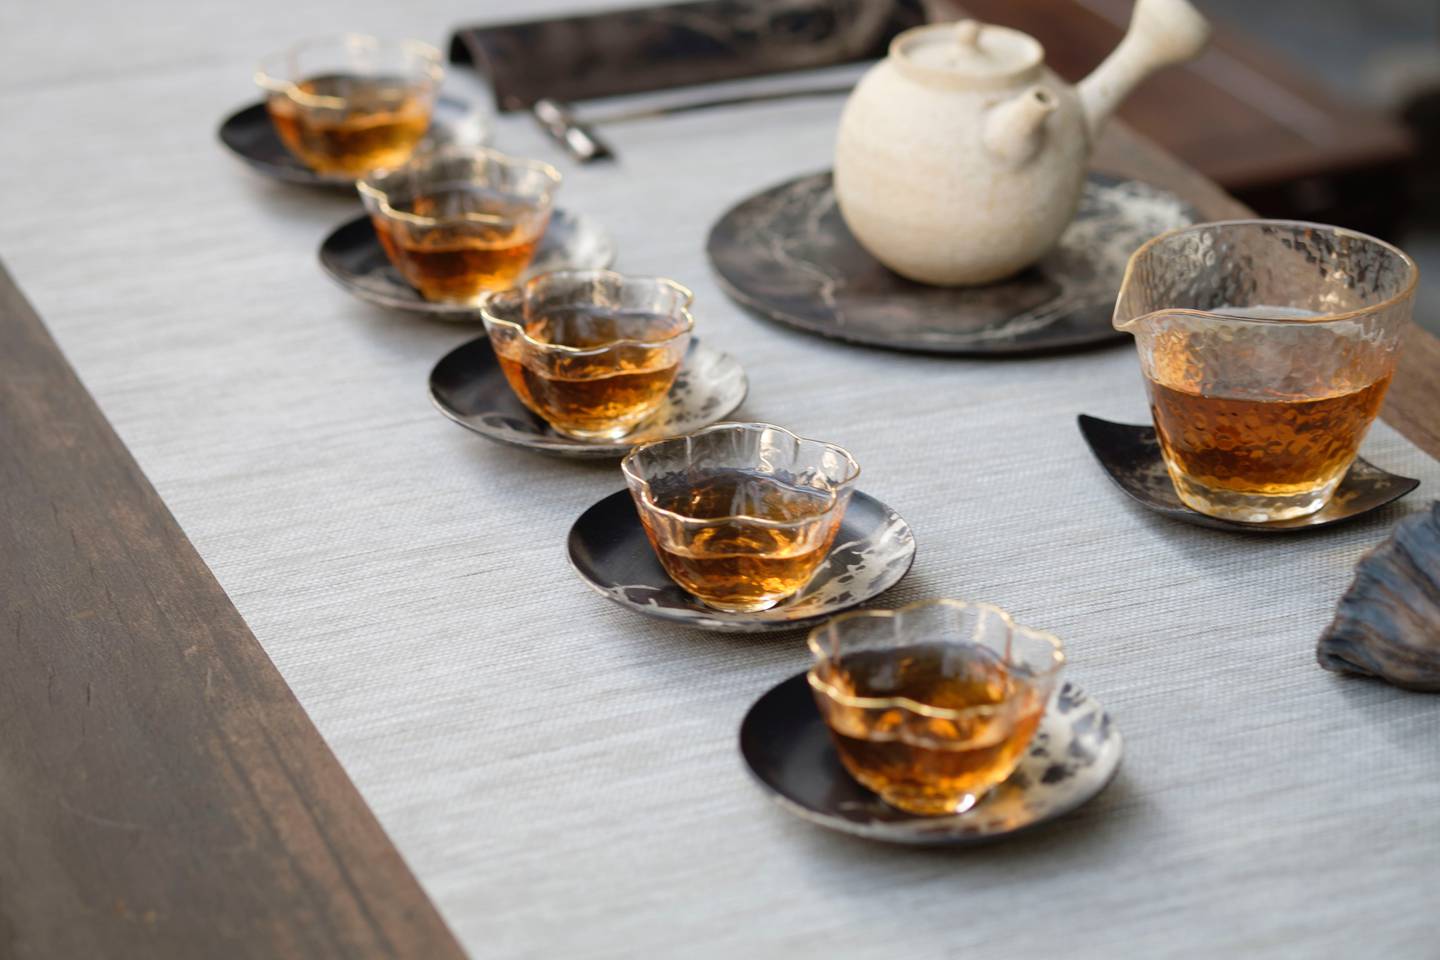 How do you take your tea; black, green, oolong or white? Unsplash